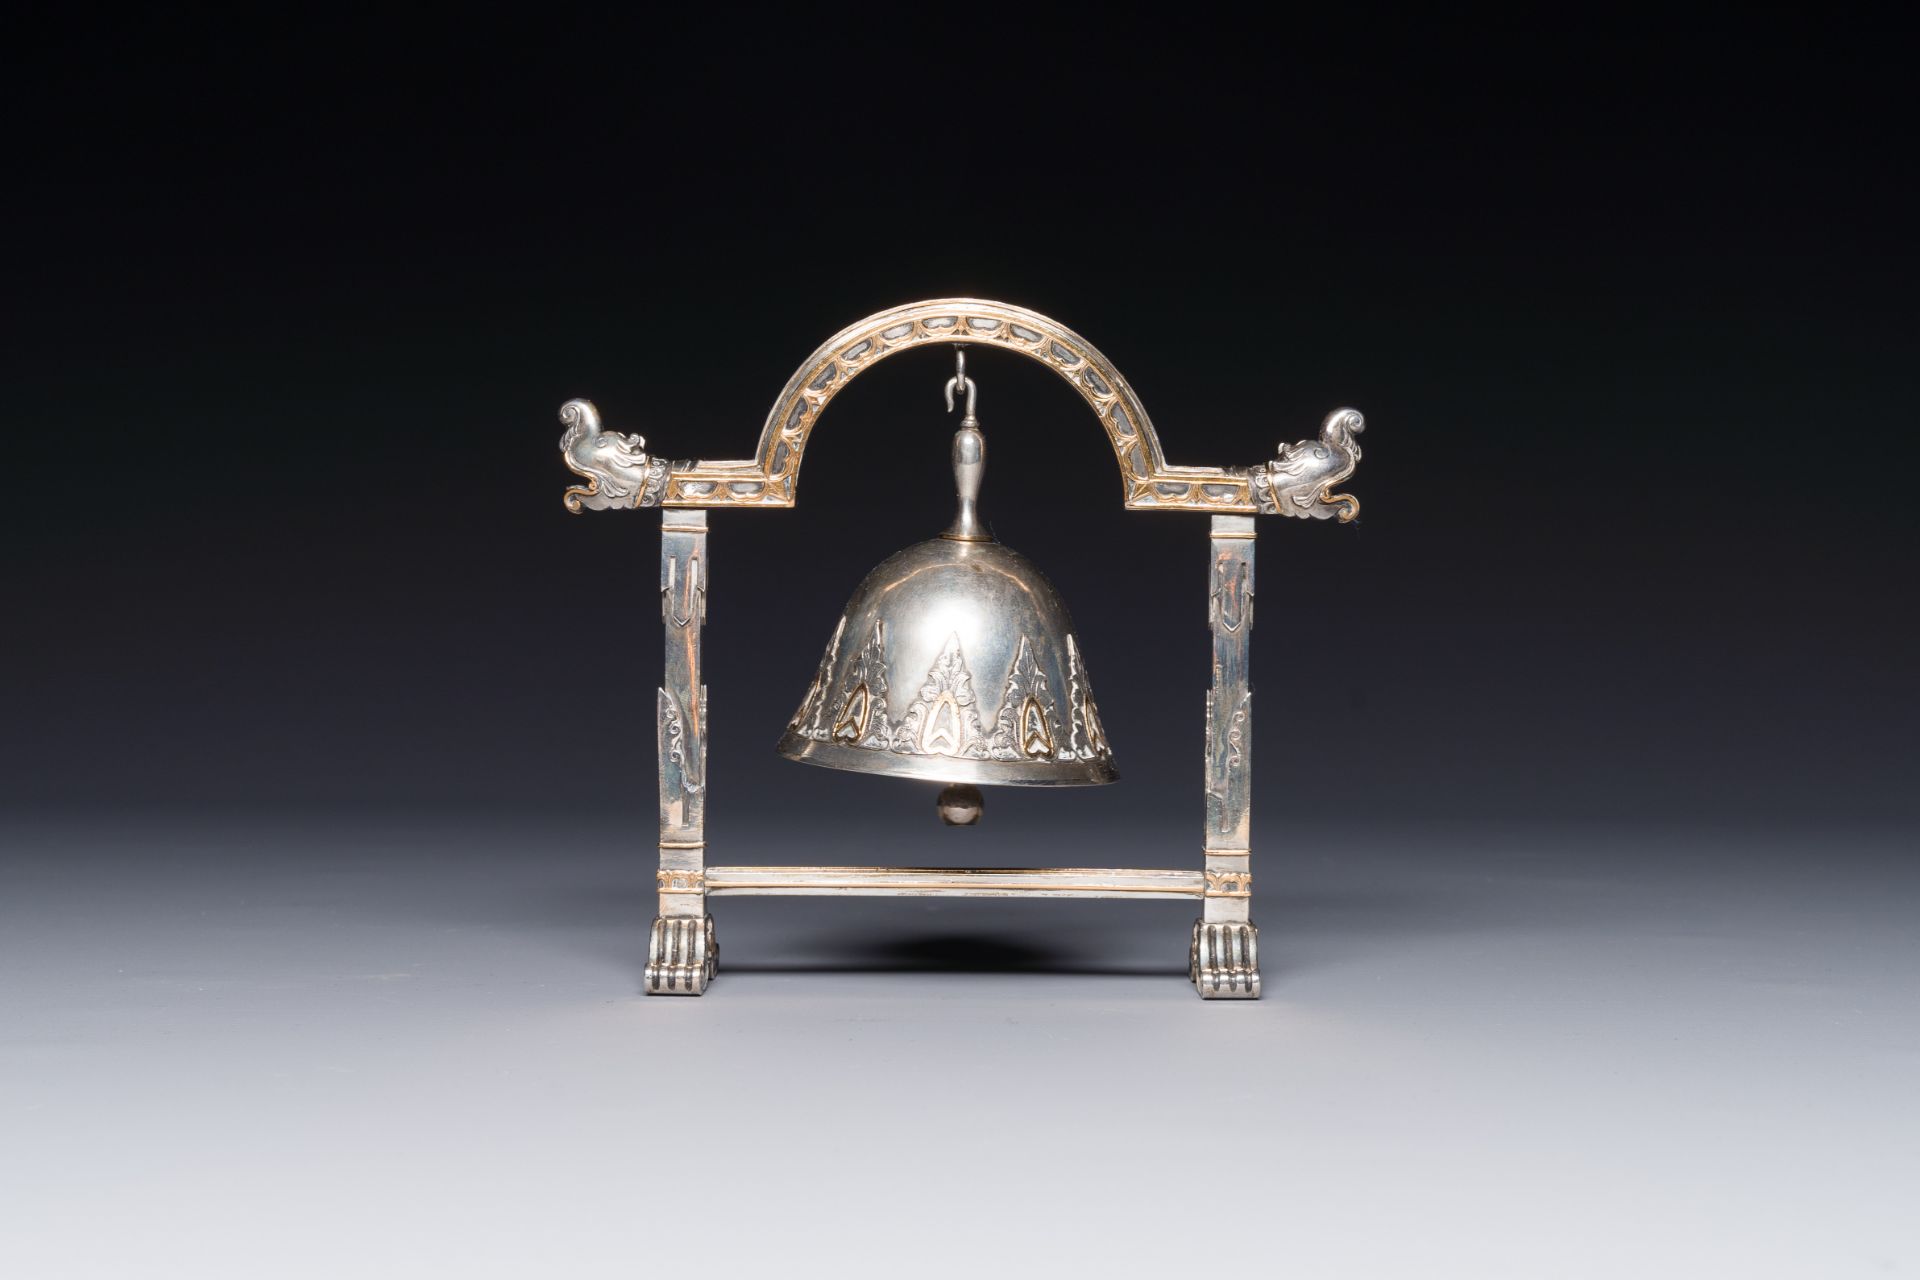 A fine parcel-gilt silver table bell or miniature gong, Southeast Asia, early 20th C. - Image 7 of 12